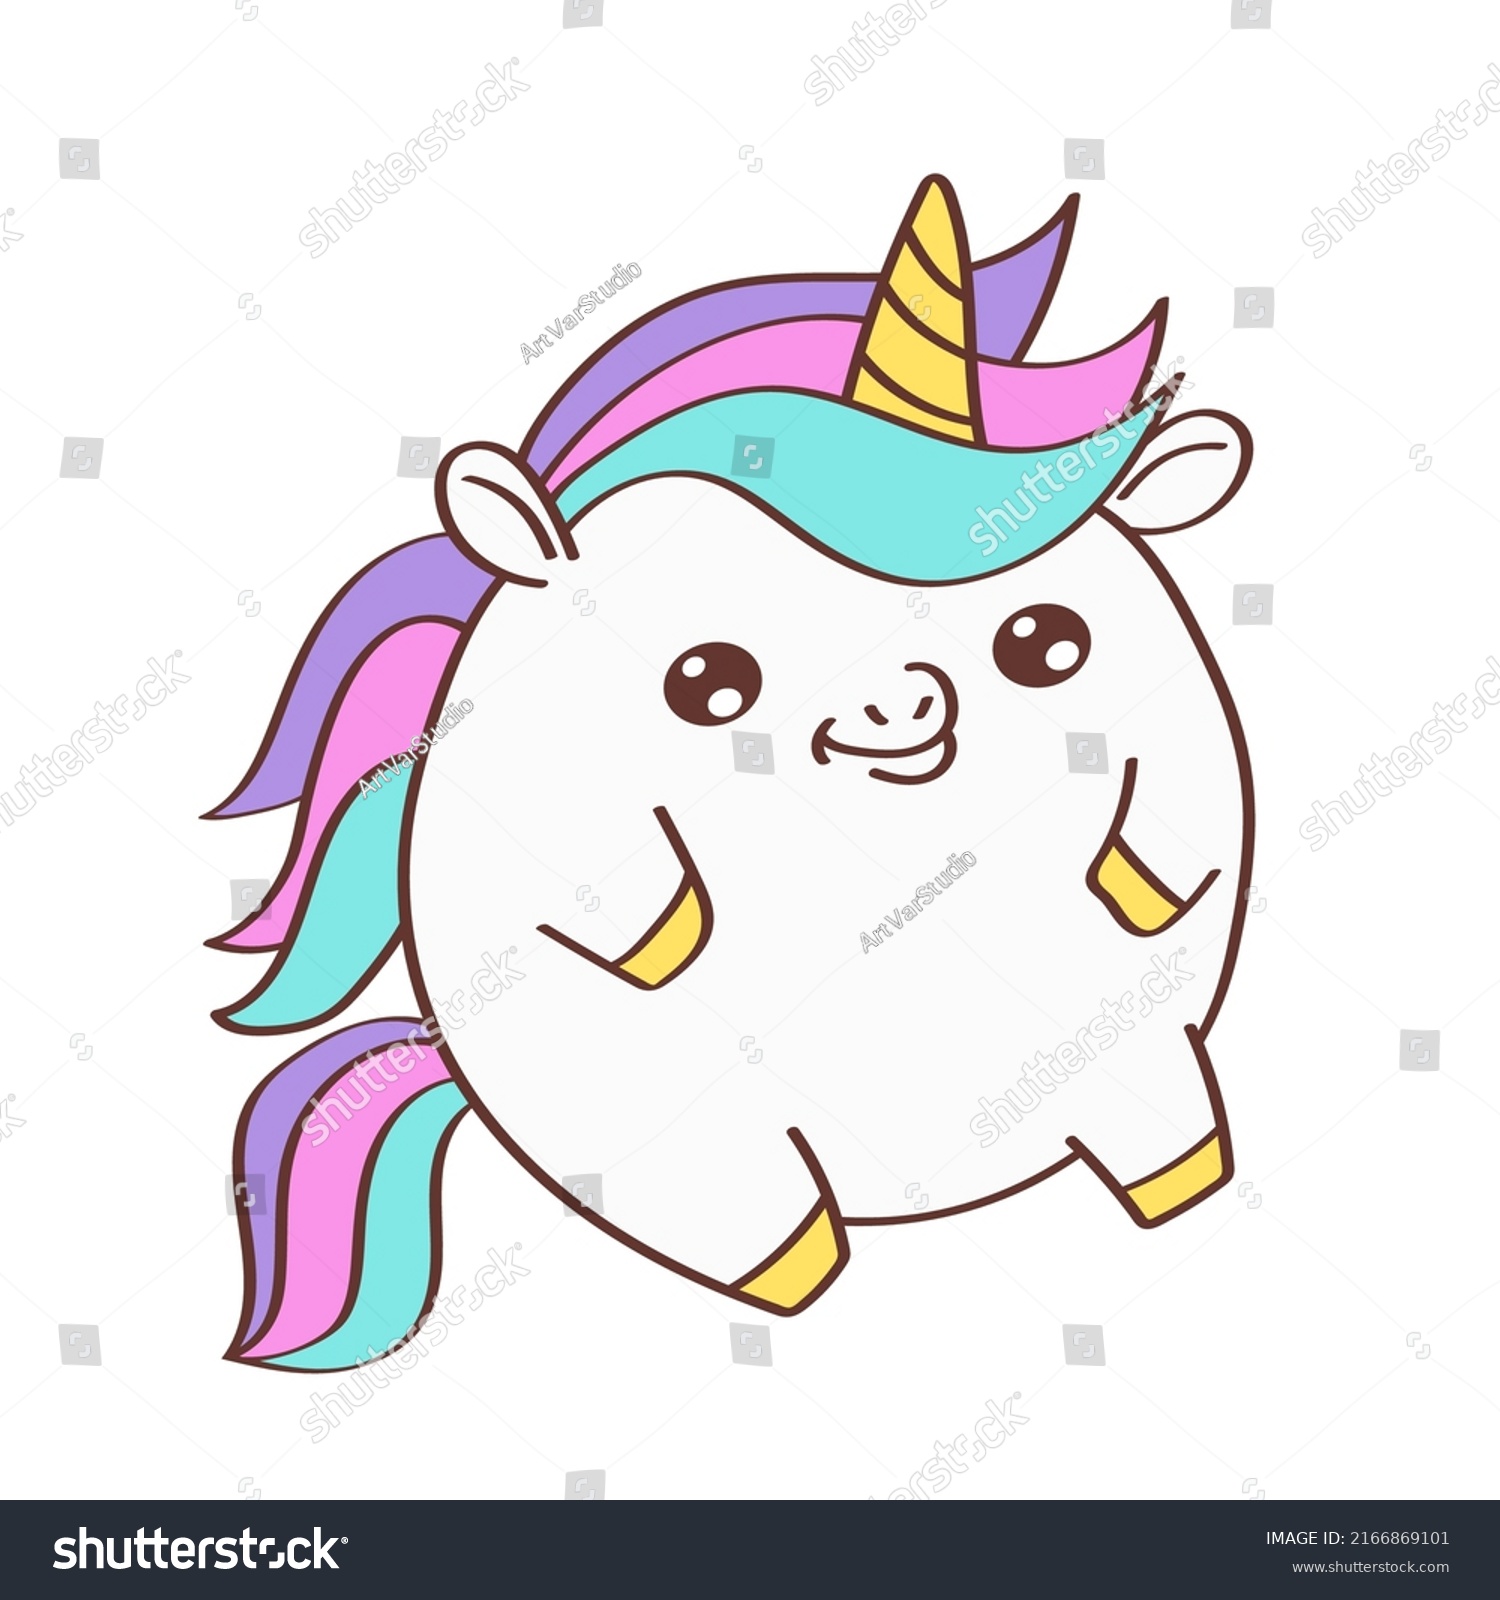 SVG of Cute Unicorn Clipart for Kids Holidays and Goods. Happy Clip Art Unicorn Plump. Vector Illustration of an Animal for Stickers, Prints for Clothes, Baby Shower Invitation.  svg